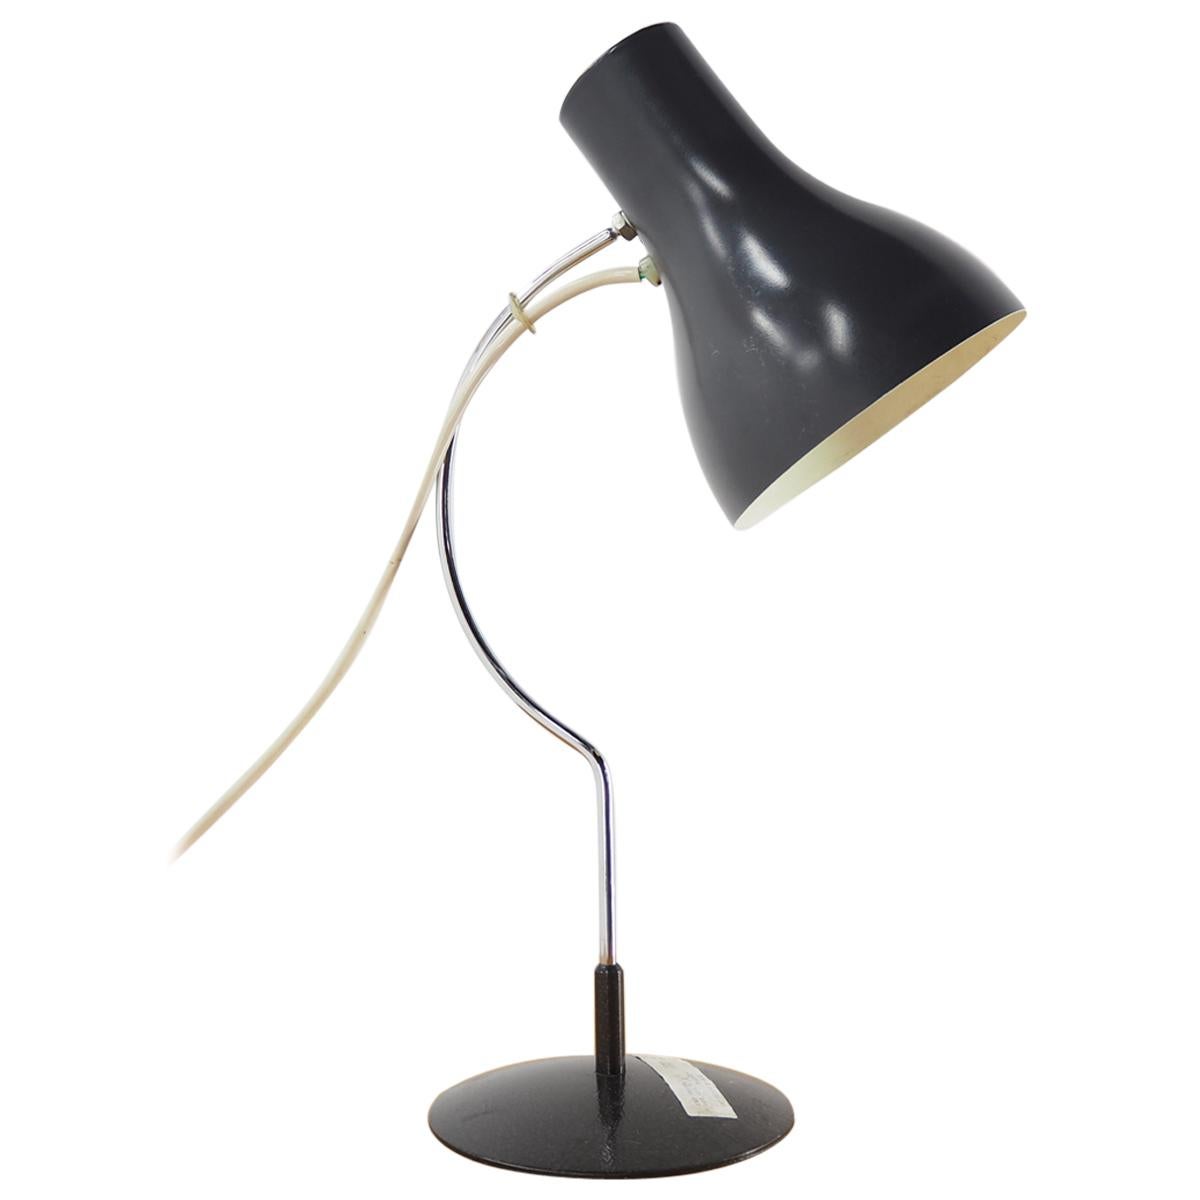 Midcentury Table Lamp Designed by J. Hurka for Napako 1970s Type 0521